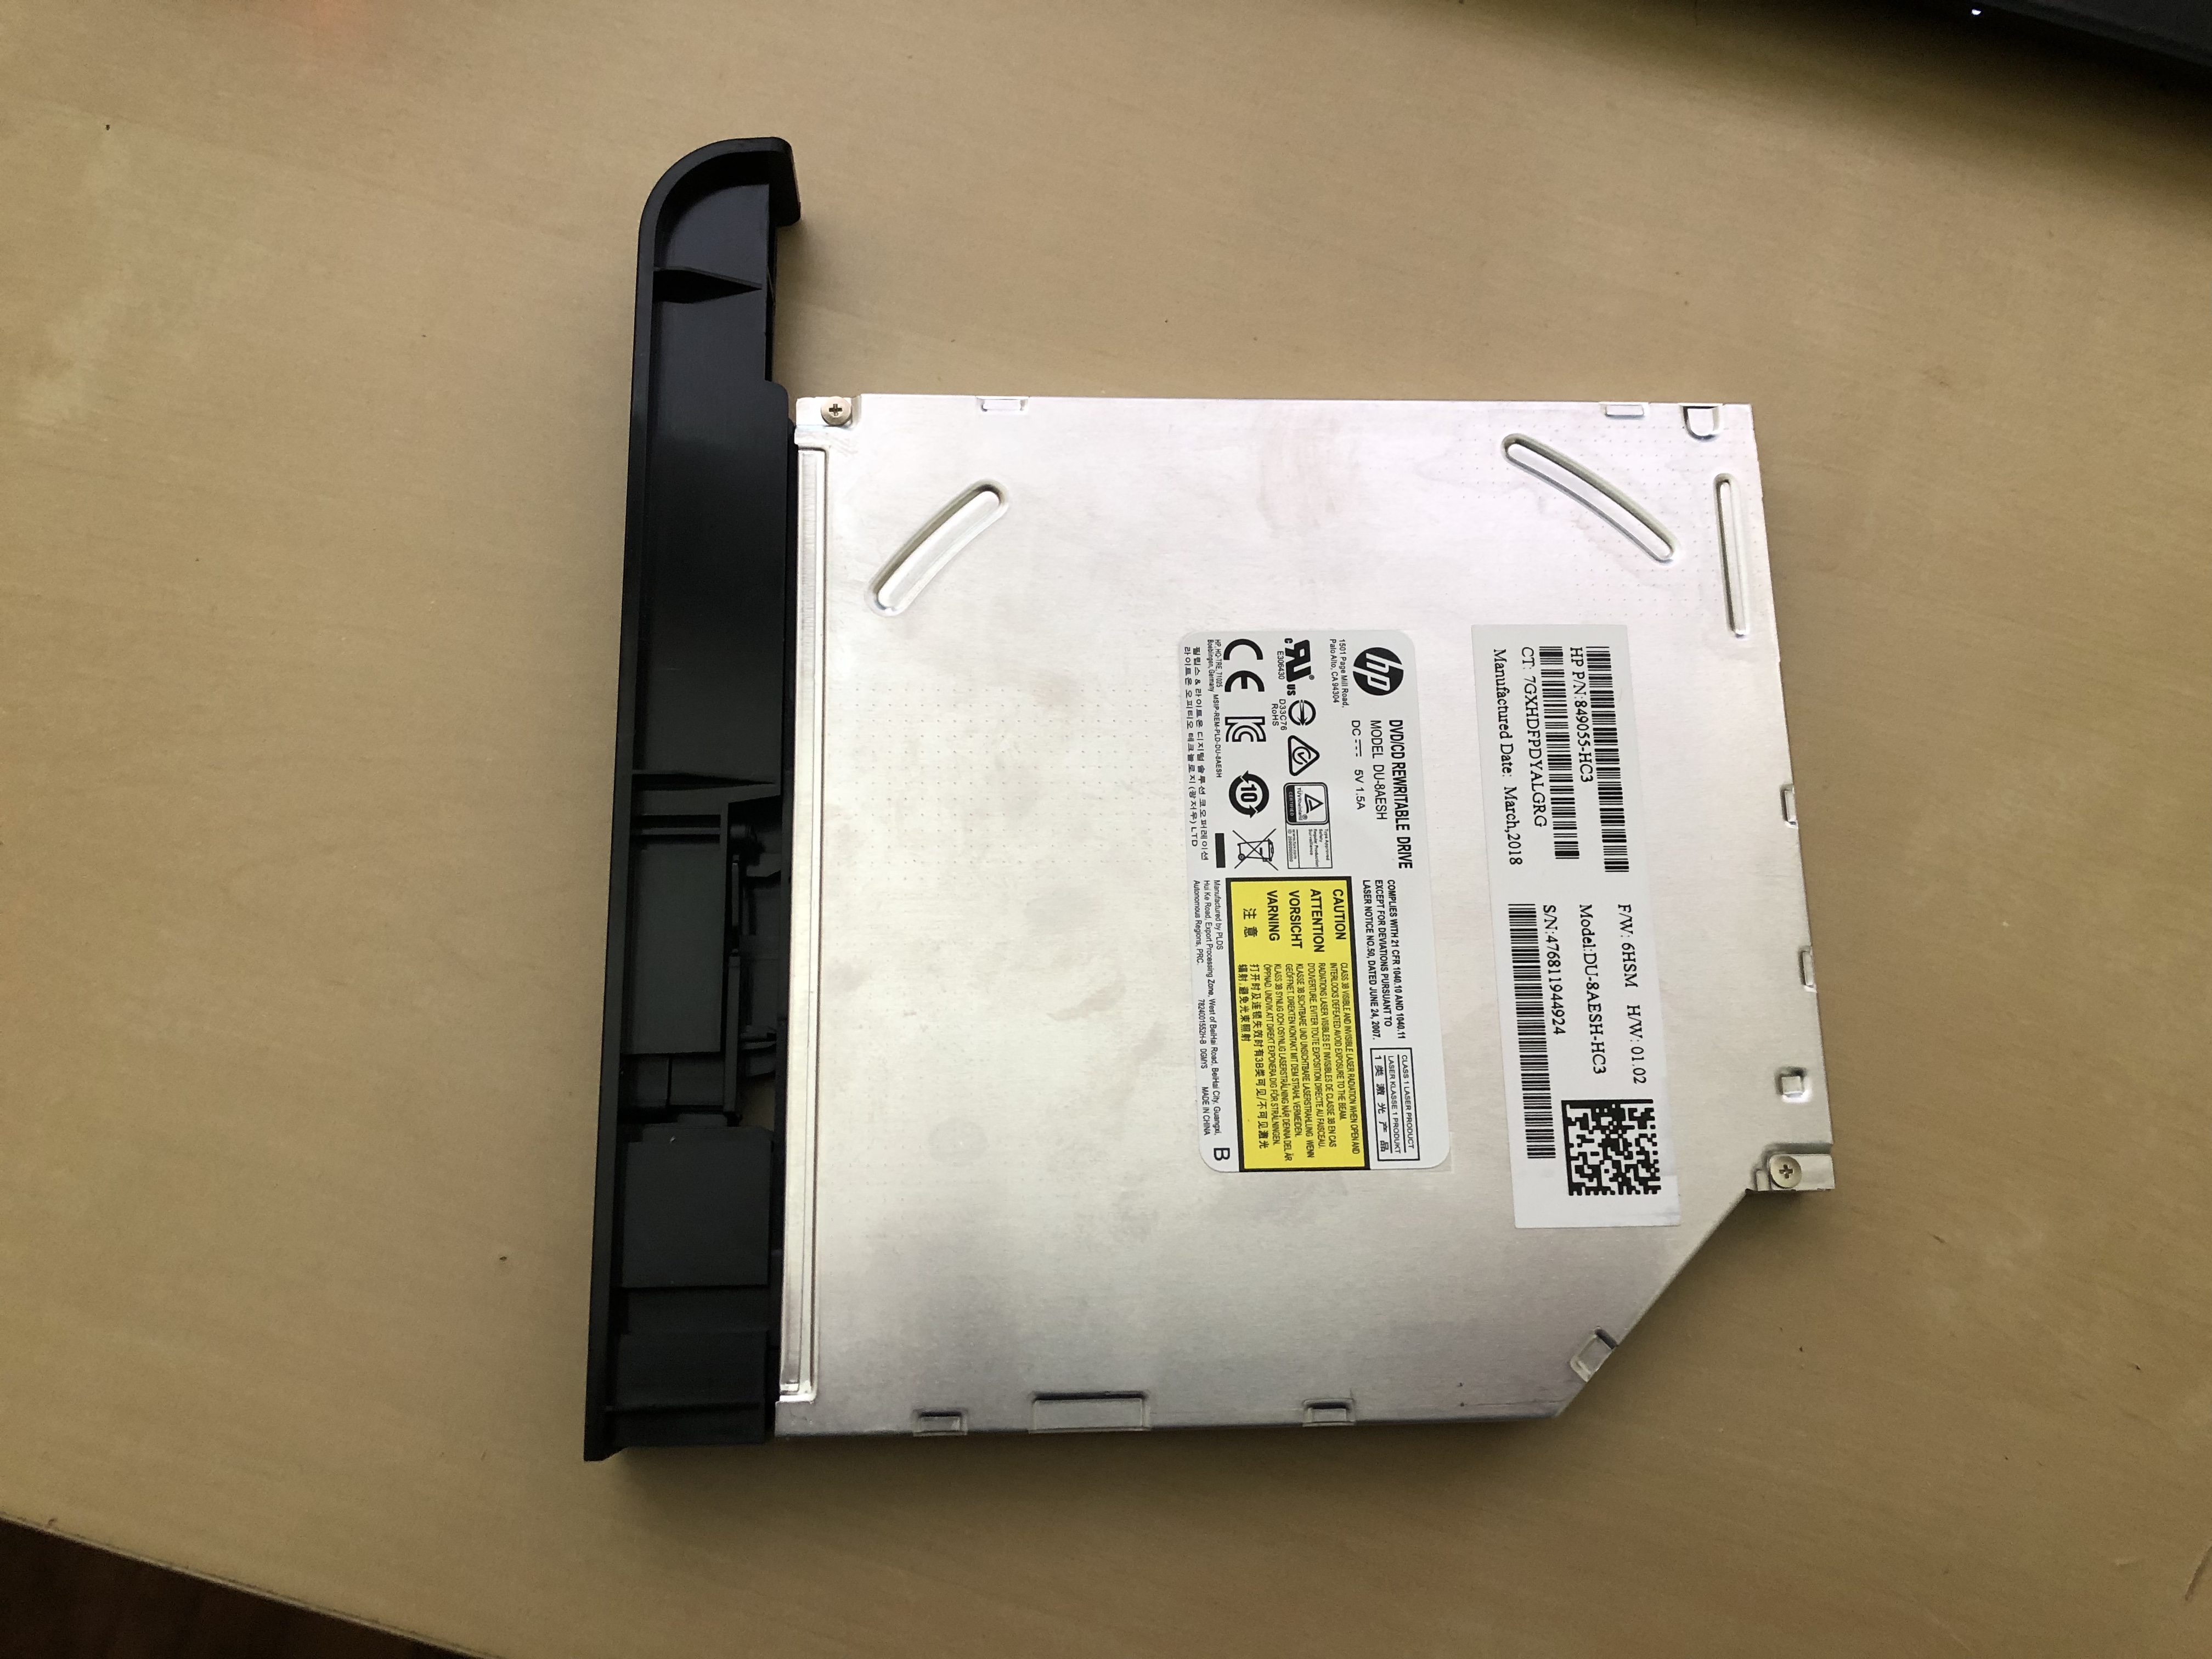 Transferring the CD Bezel to a New Drive? - HP Support Community - 7022654